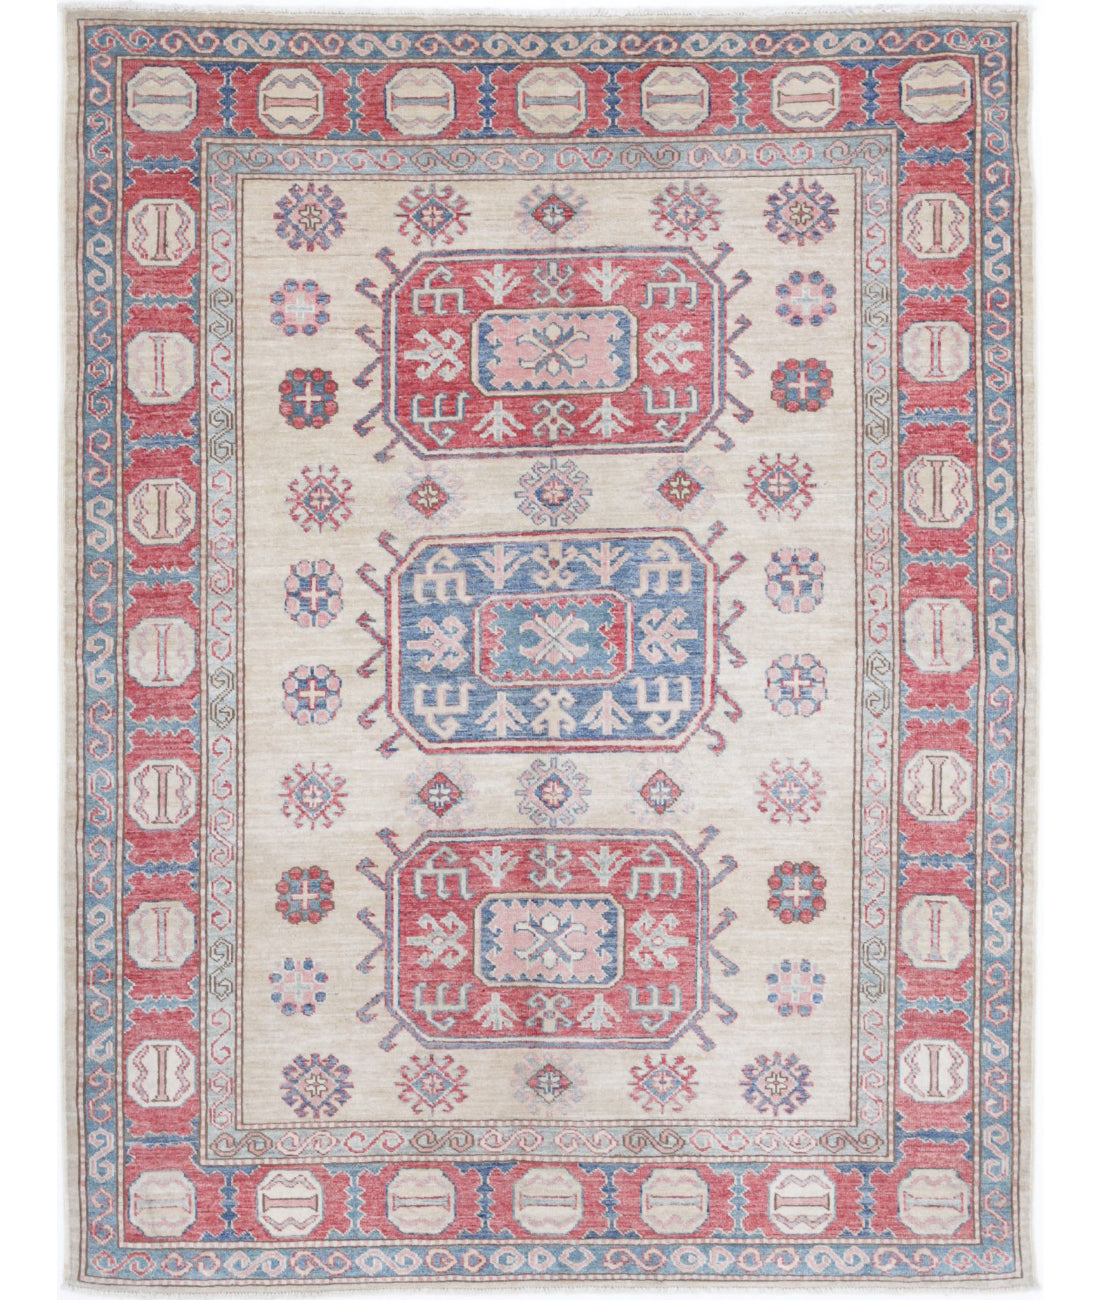 Hand Knotted Royal Kazak Wool Rug - 4'8'' x 5'11'' 4'8'' x 5'11'' (140 X 178) / Ivory / Red